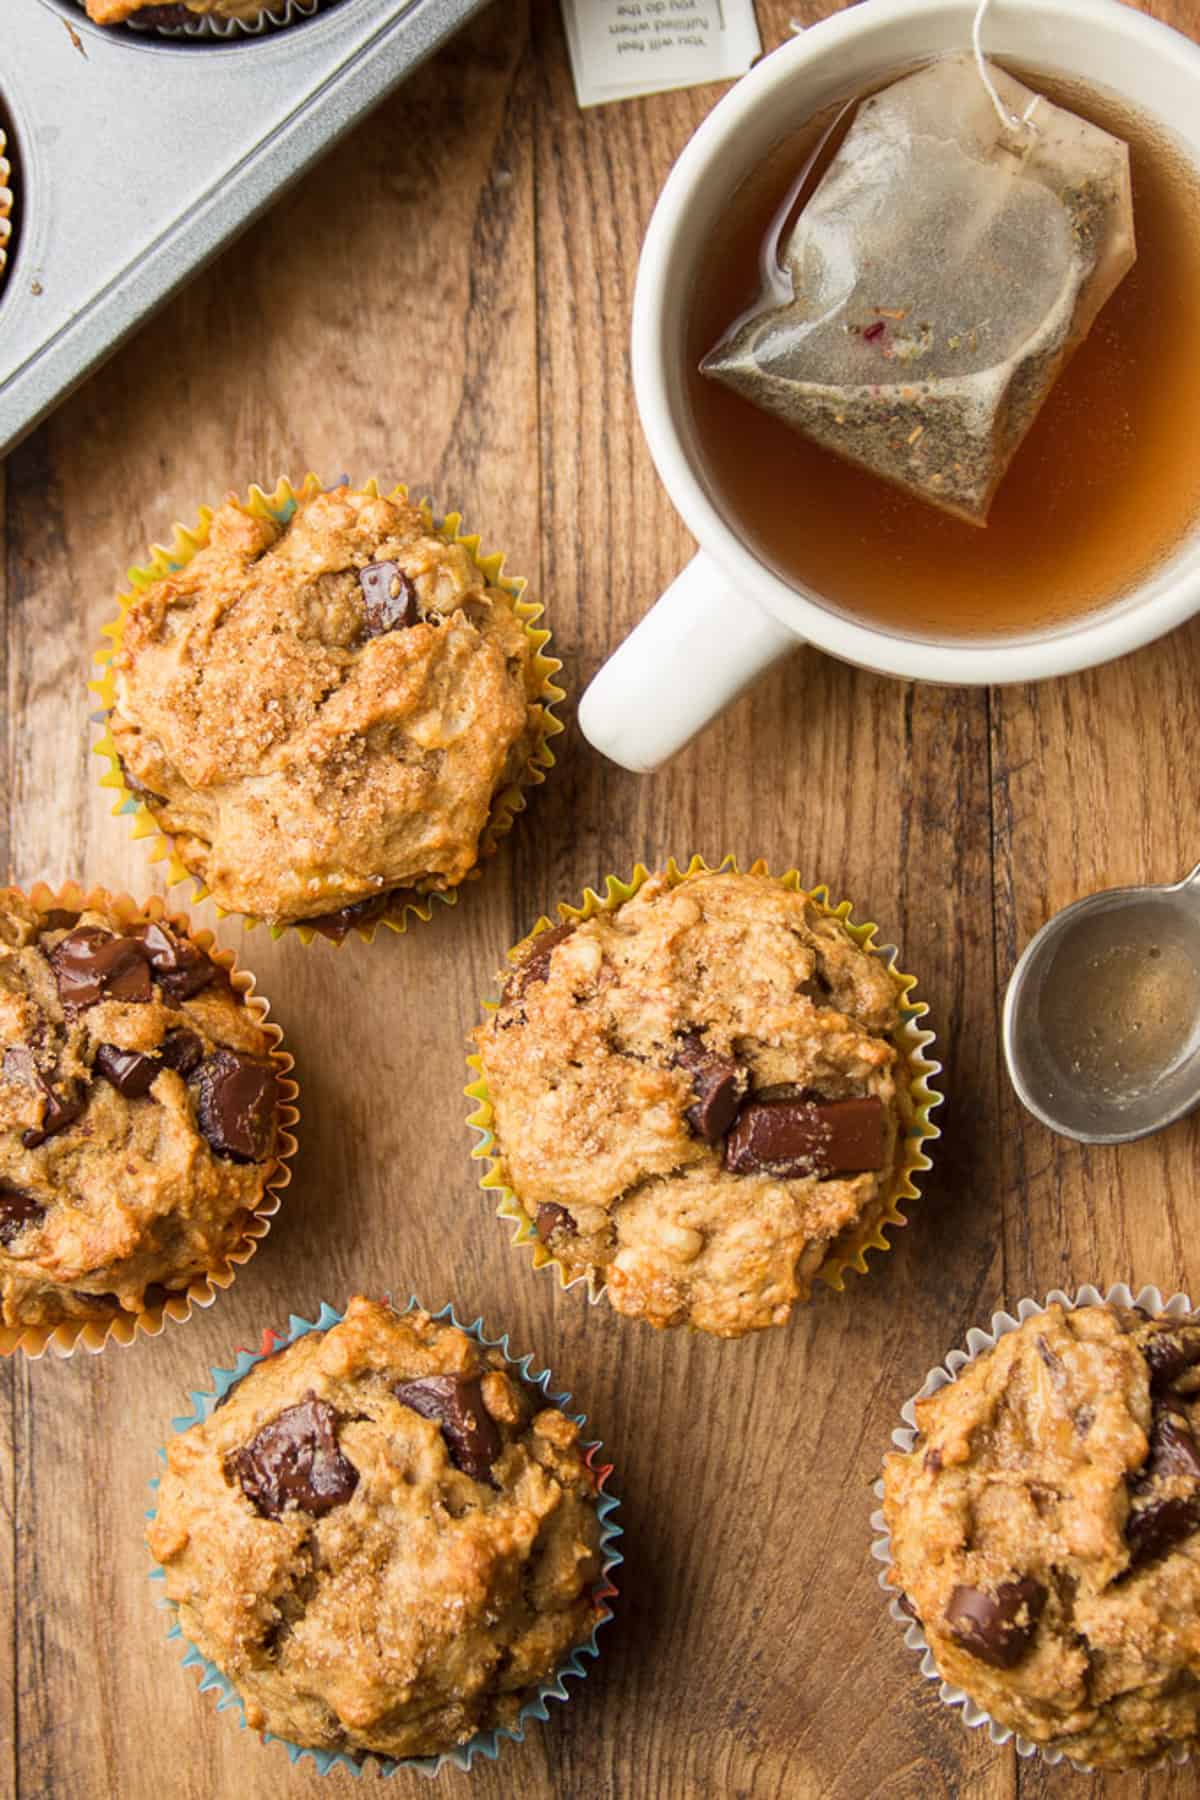 Vegan banana muffins on a wooden surface with a cup of tea and a spoon.